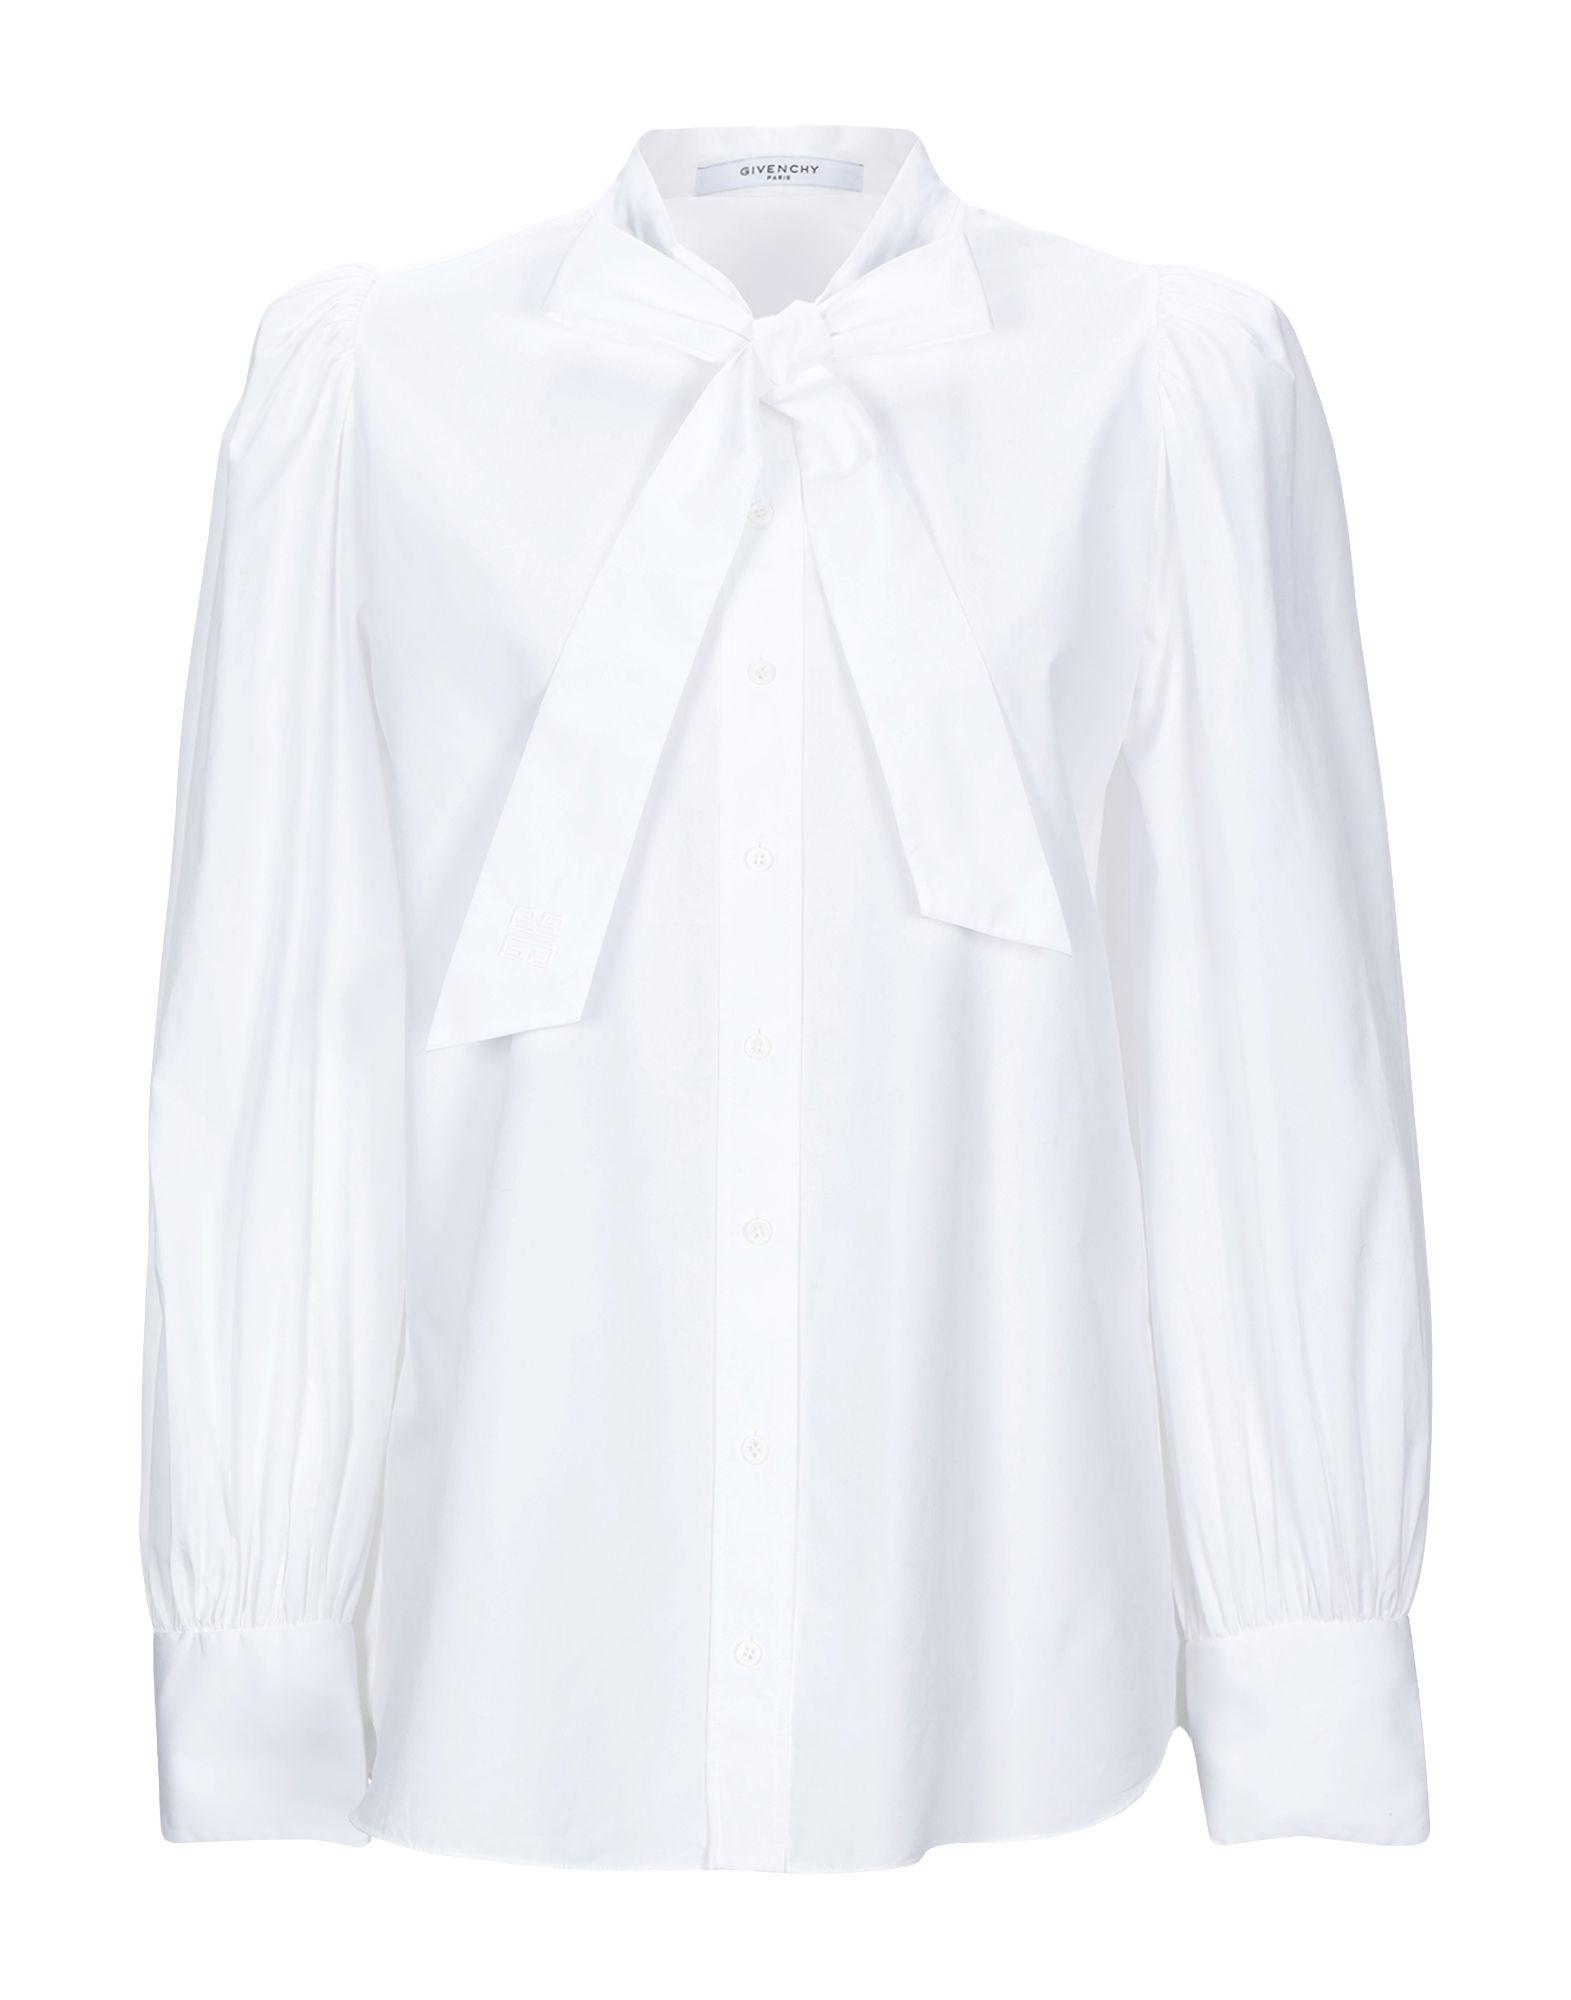 Givenchy Cotton Shirt in White - Lyst